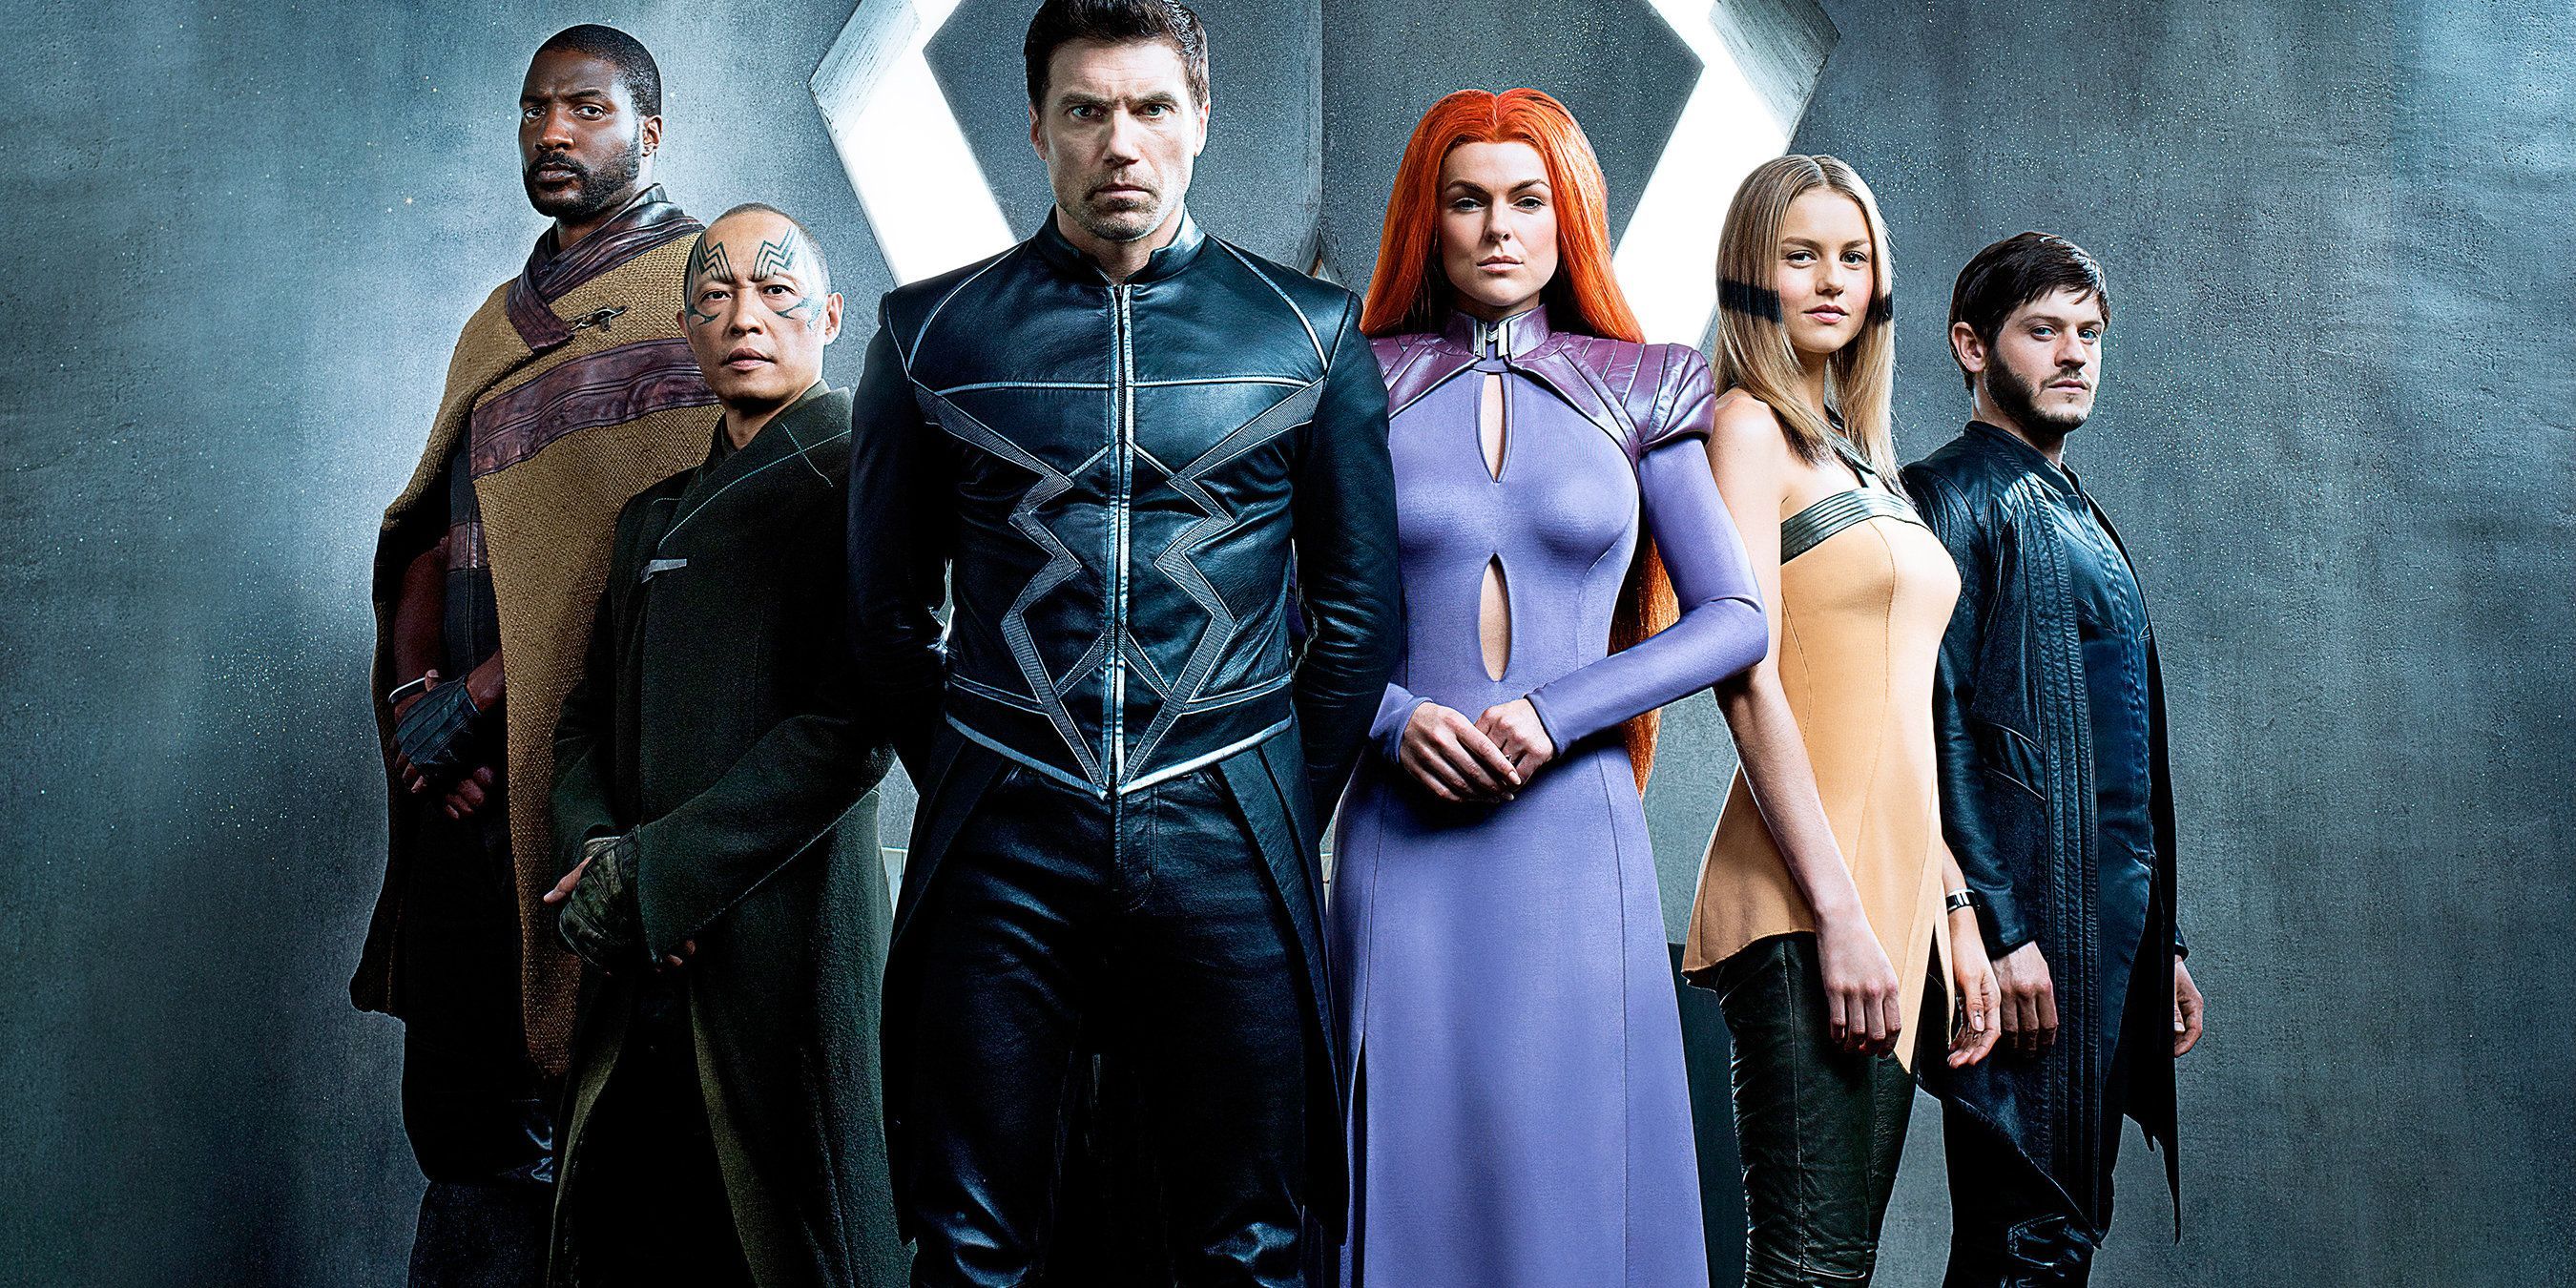 The Inhuman Royal Family from Marvel's Inhumans